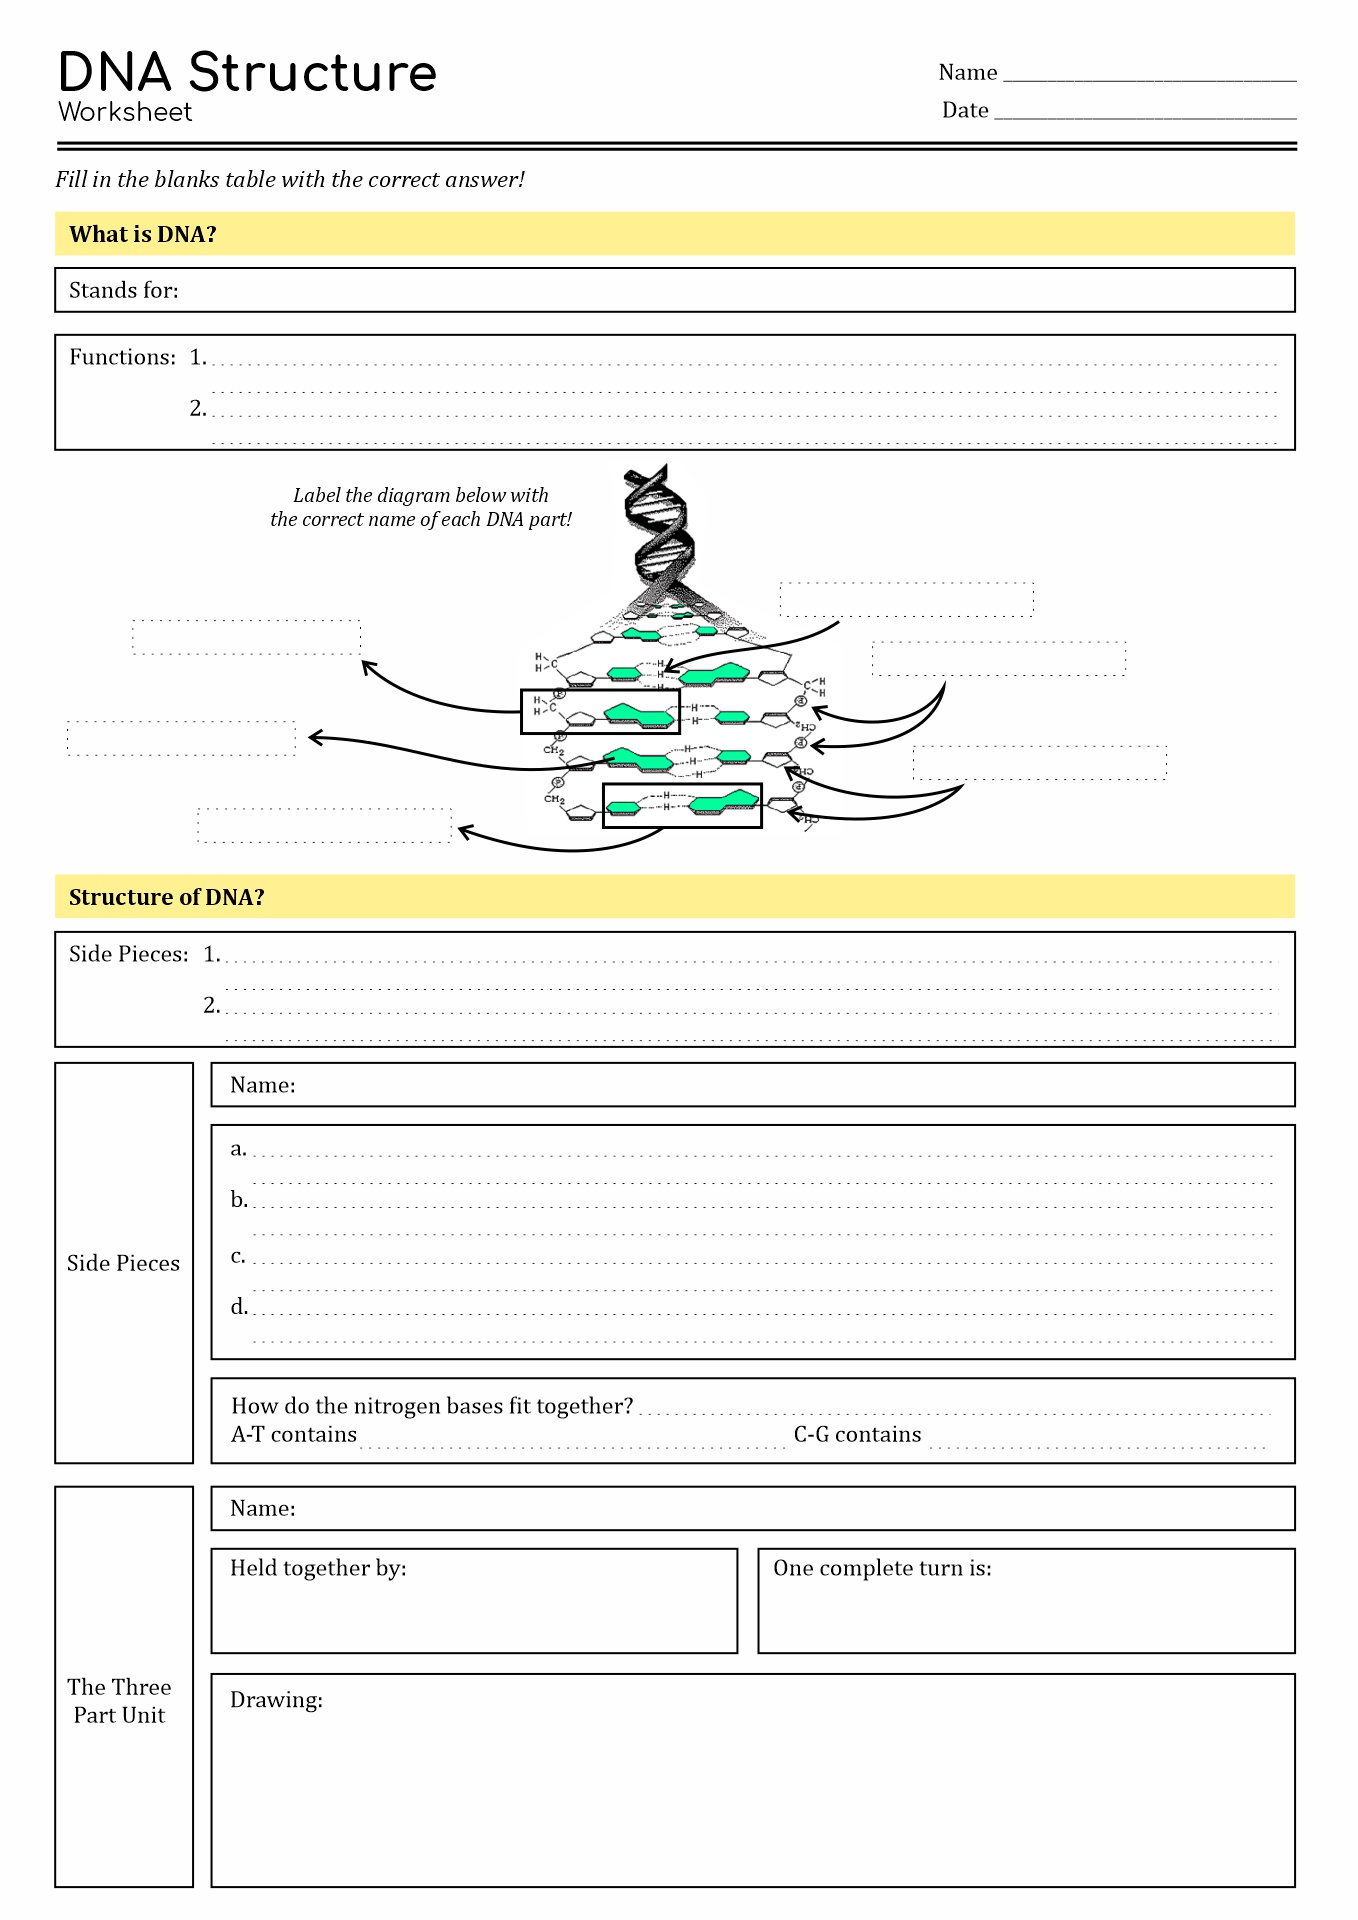 DNA Structure Worksheet Answers Image